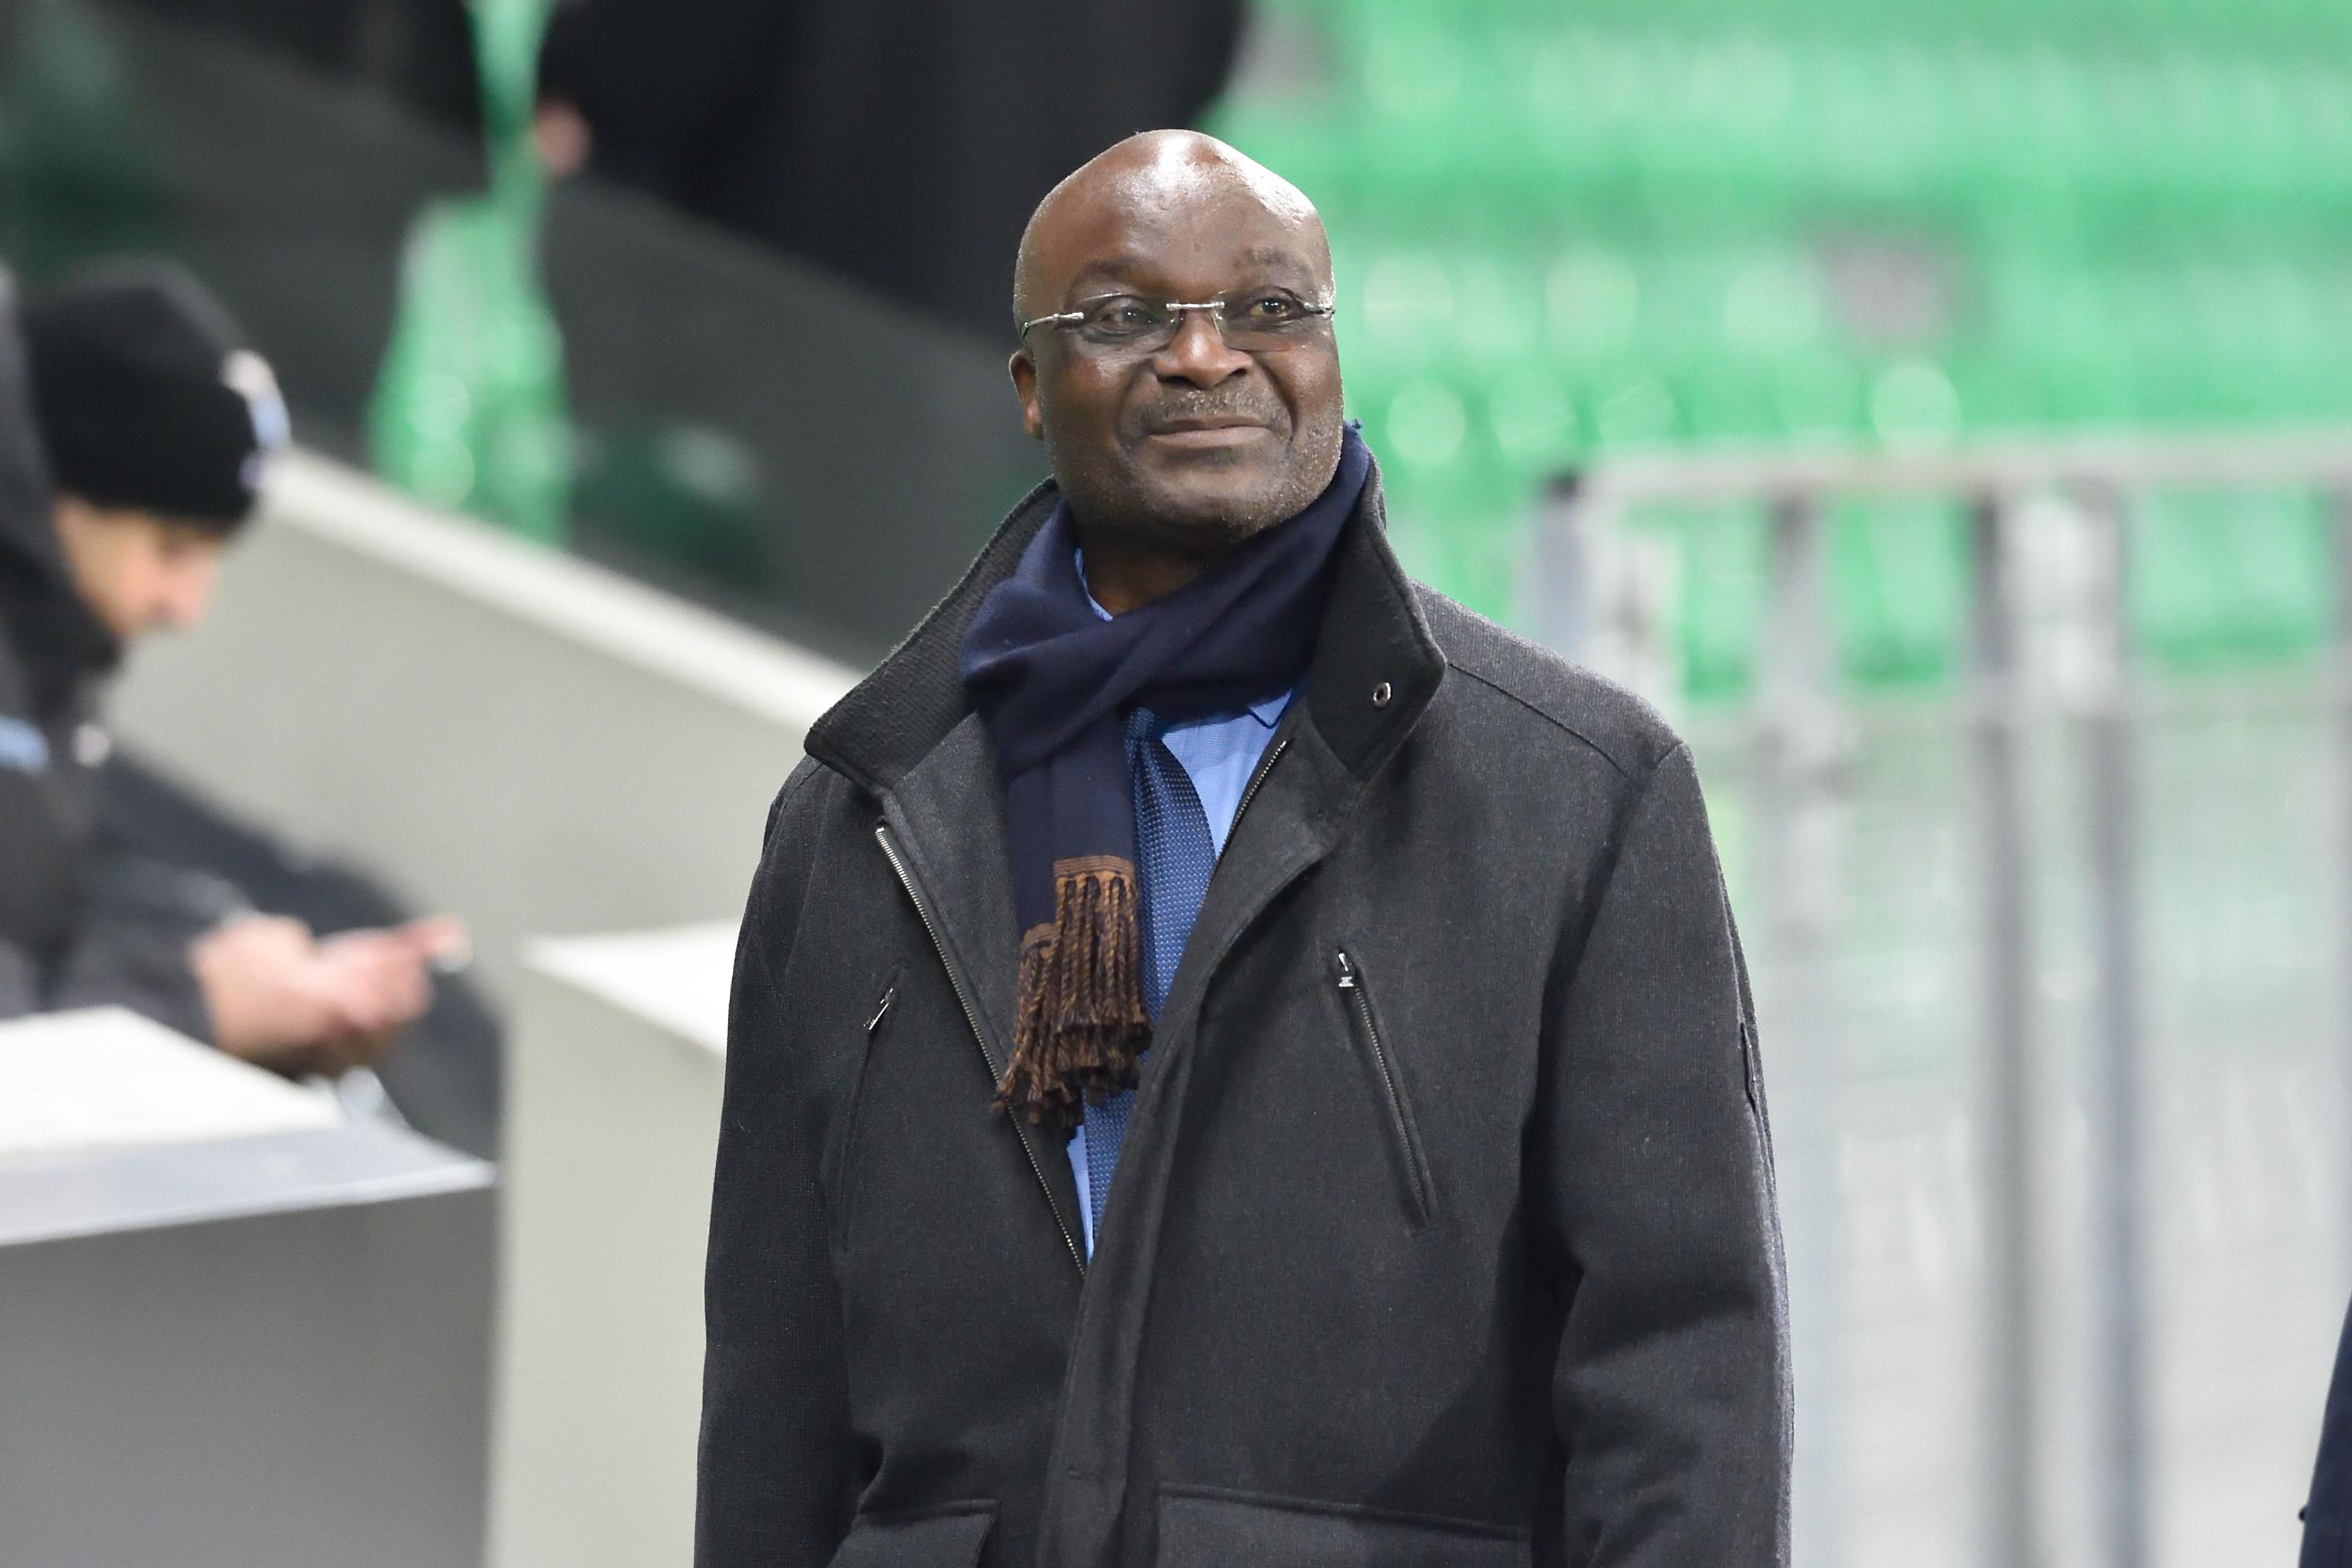 "The Maghreb countries are the ones who always make a mess", Roger Milla's lunar outing before the CAN thumbnail